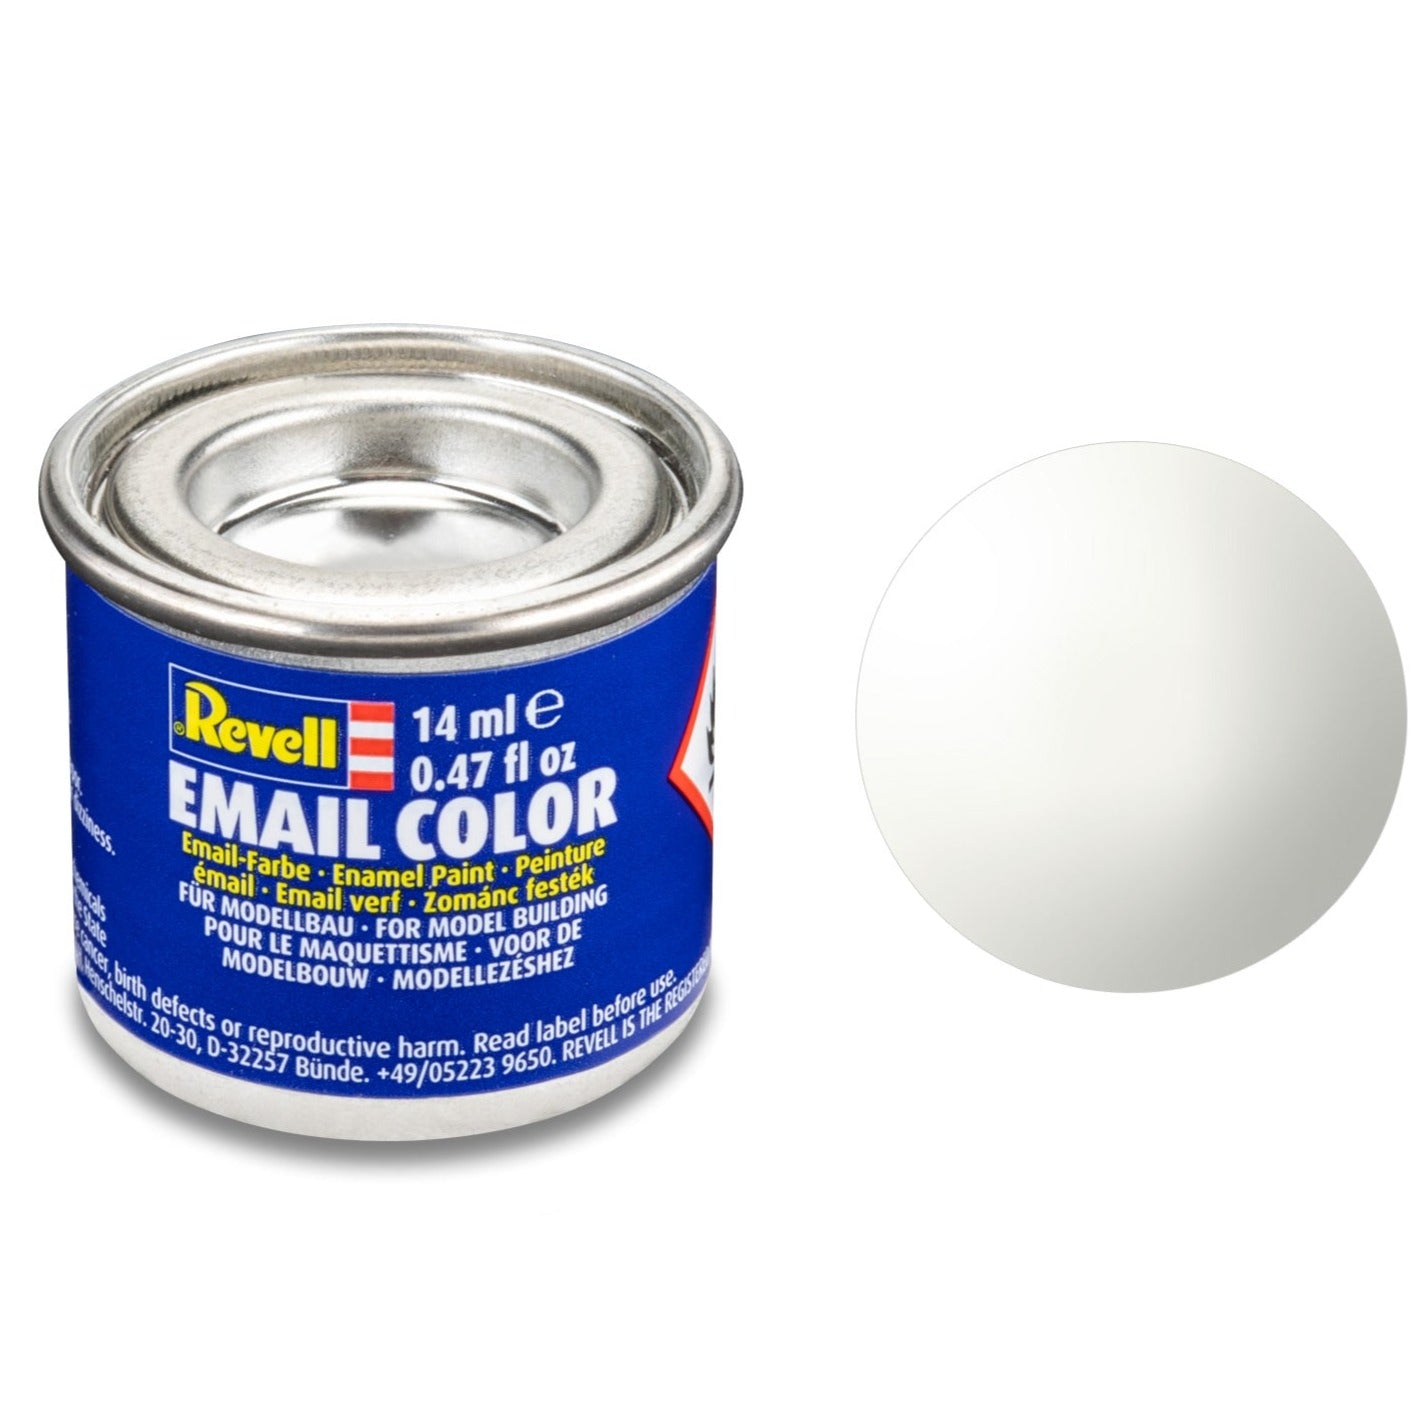 Revell Gloss "White" (RAL 9010) Enamel Paint - 14ml - 32104 - Loaded Dice Barry Vale of Glamorgan CF64 3HD